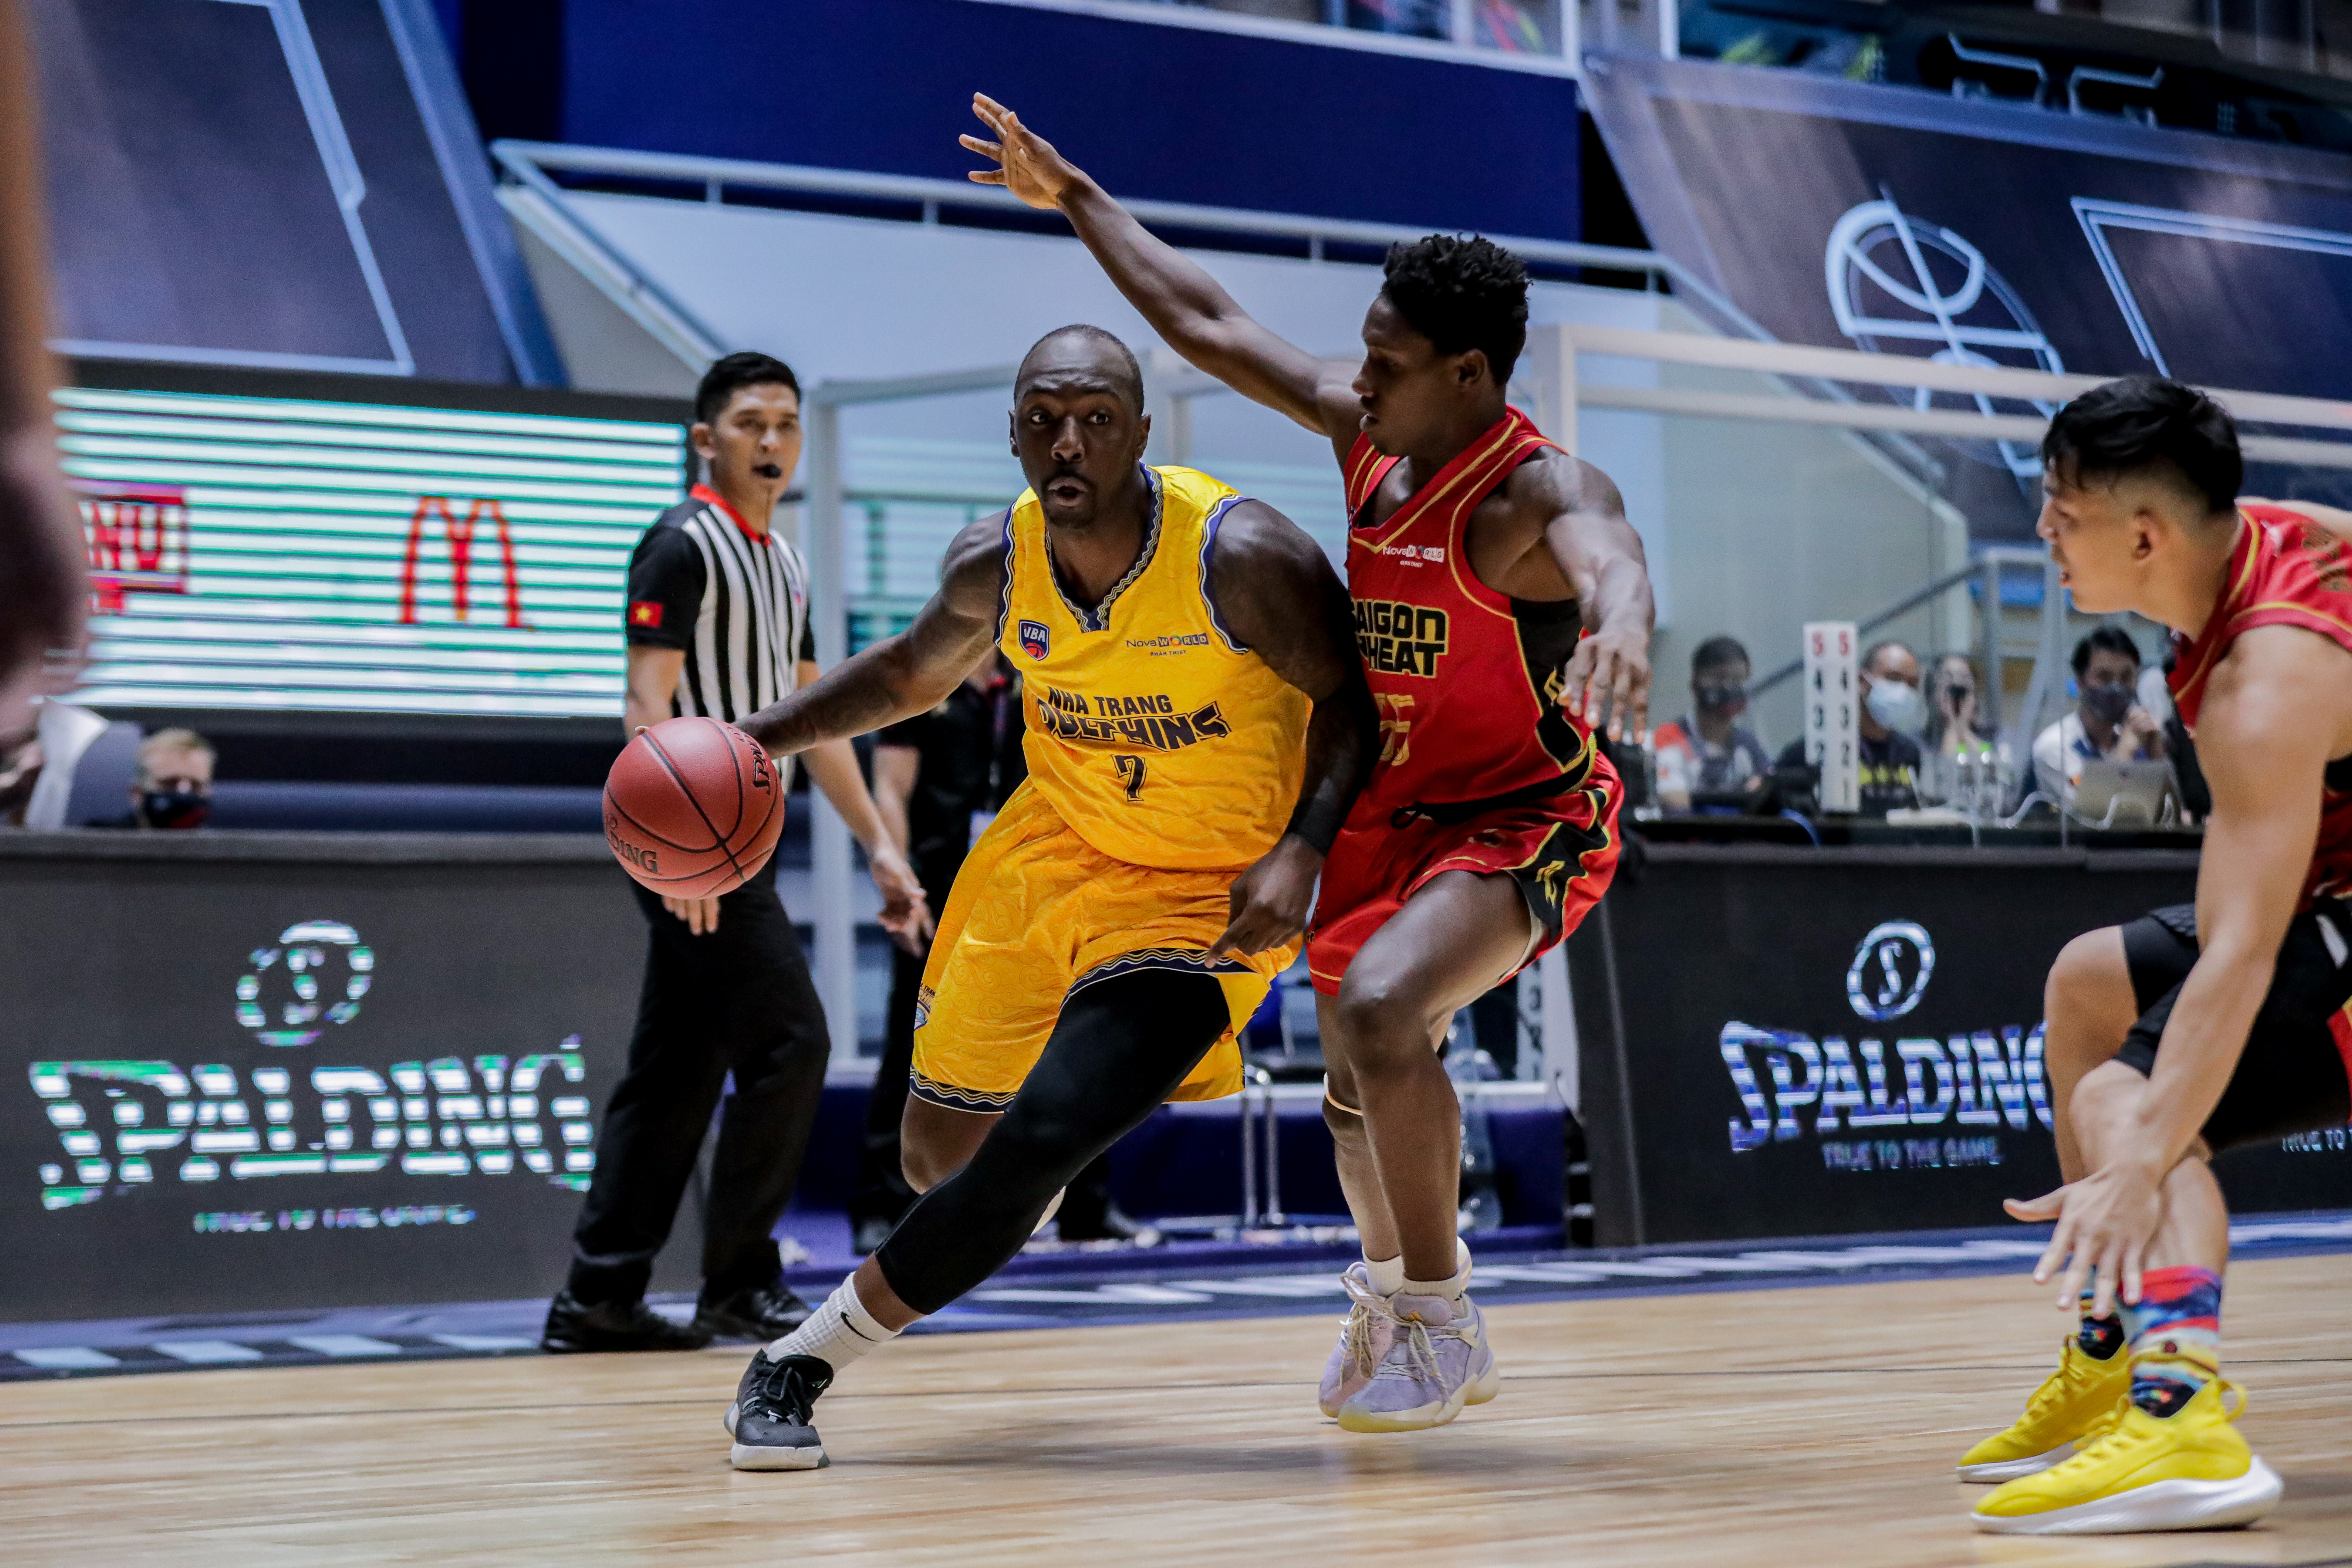 Saigon Heat snatches victory from Nha Trang Dolphins in first game of VBA Premier Bubble Games